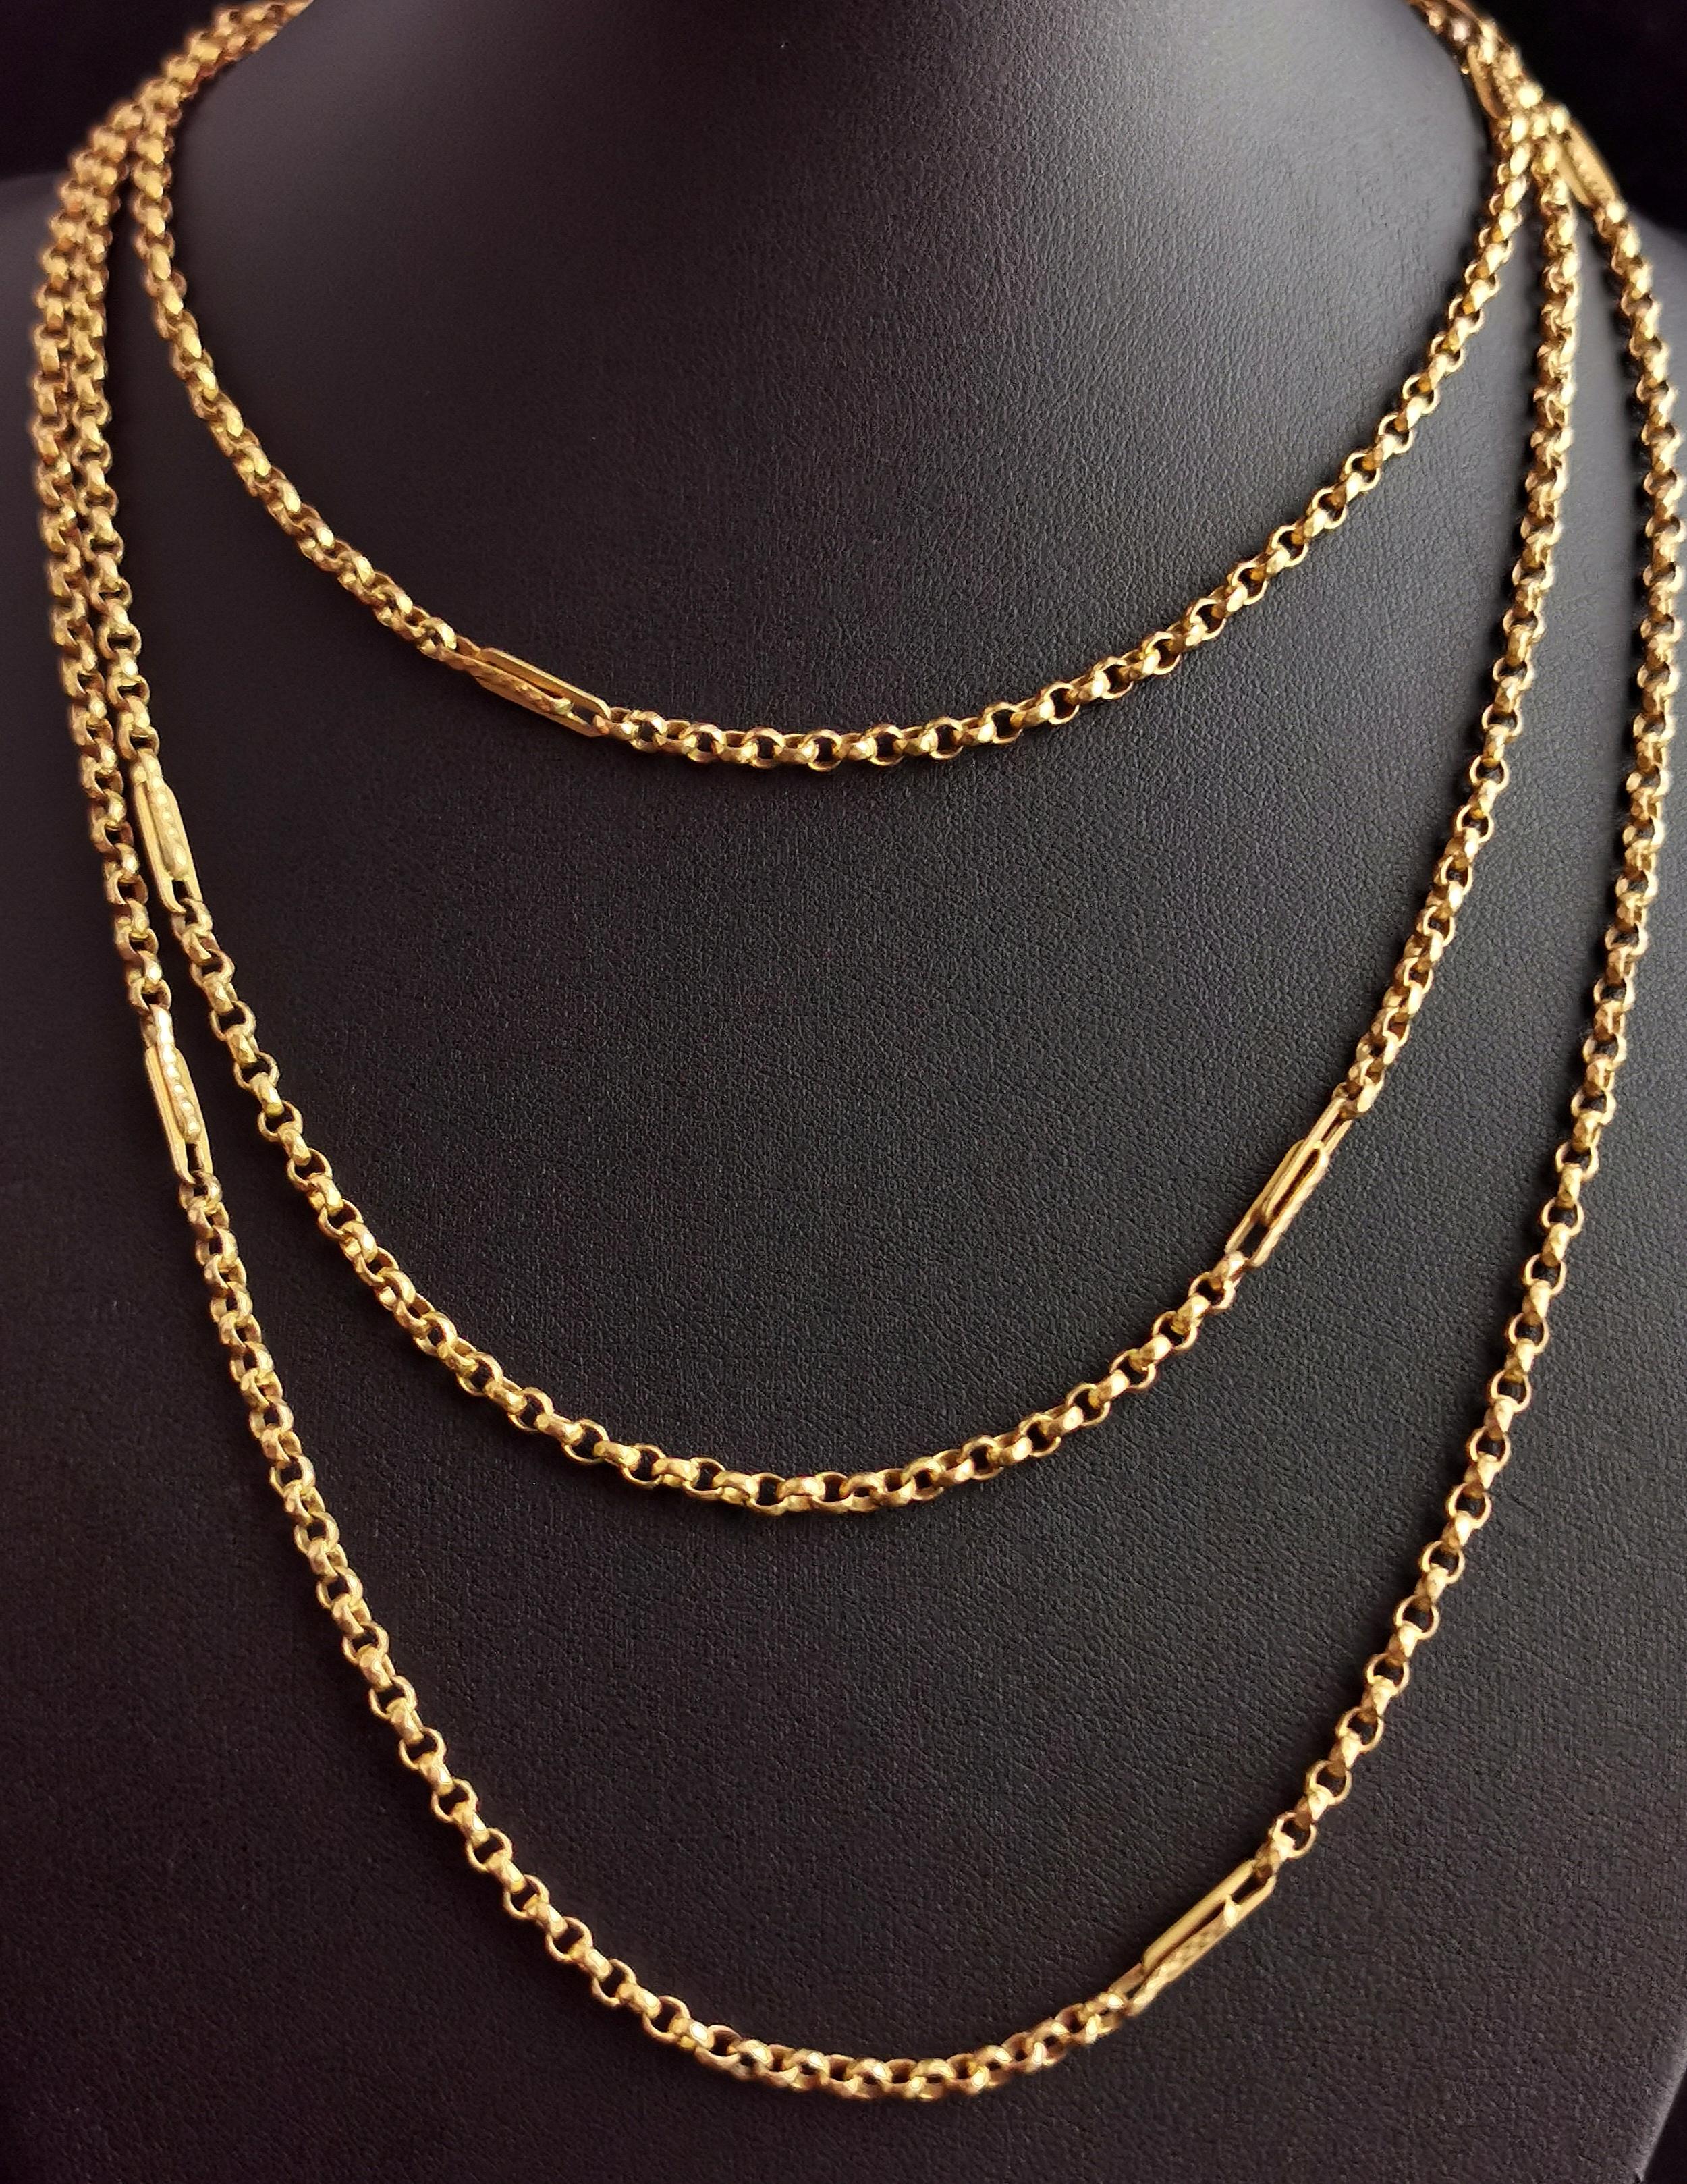 A gorgeous antique, Victorian era gold plated longuard chain or muff chain.

Rich golden, faceted rolo links intercepted with fancy interlocking paperclip type links.

It has that lovely rich old gold tone only to be found on older pieces.

A